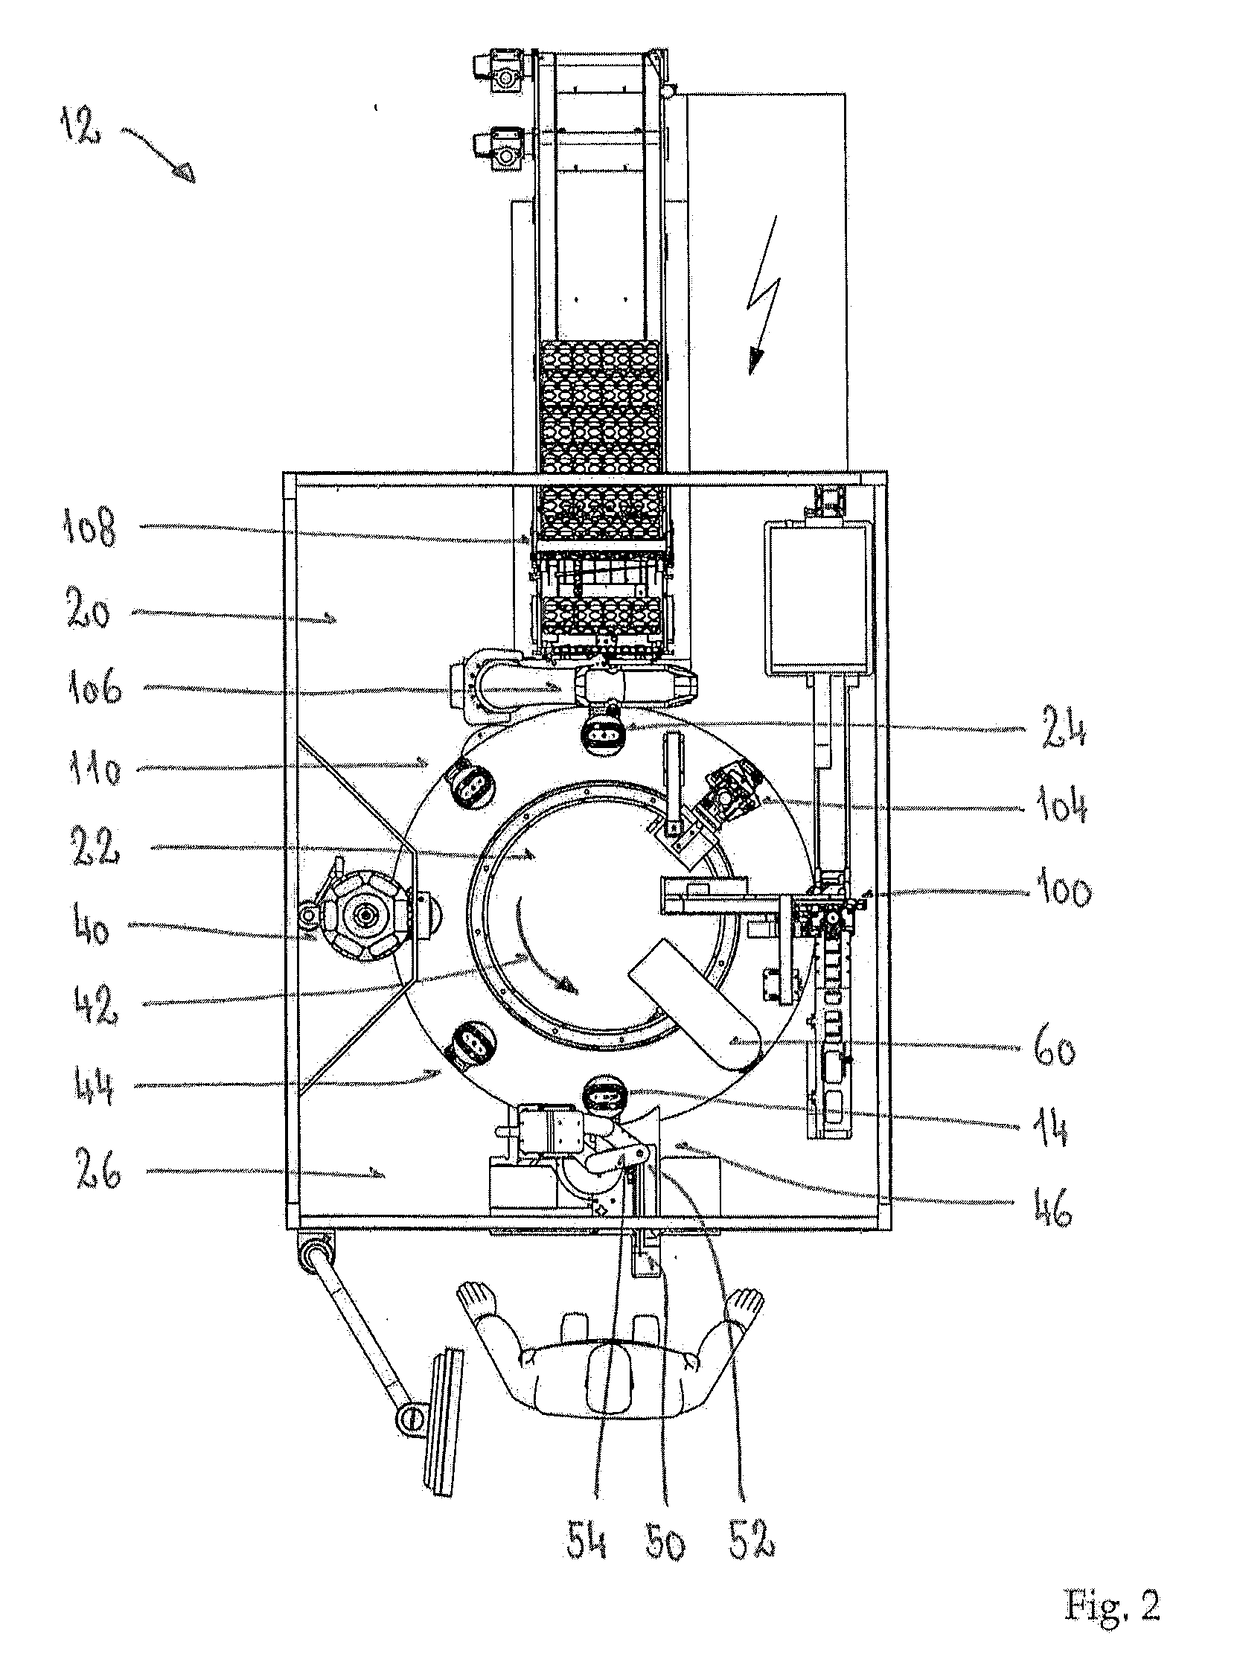 Universal winding machine for a multitude of tray designs